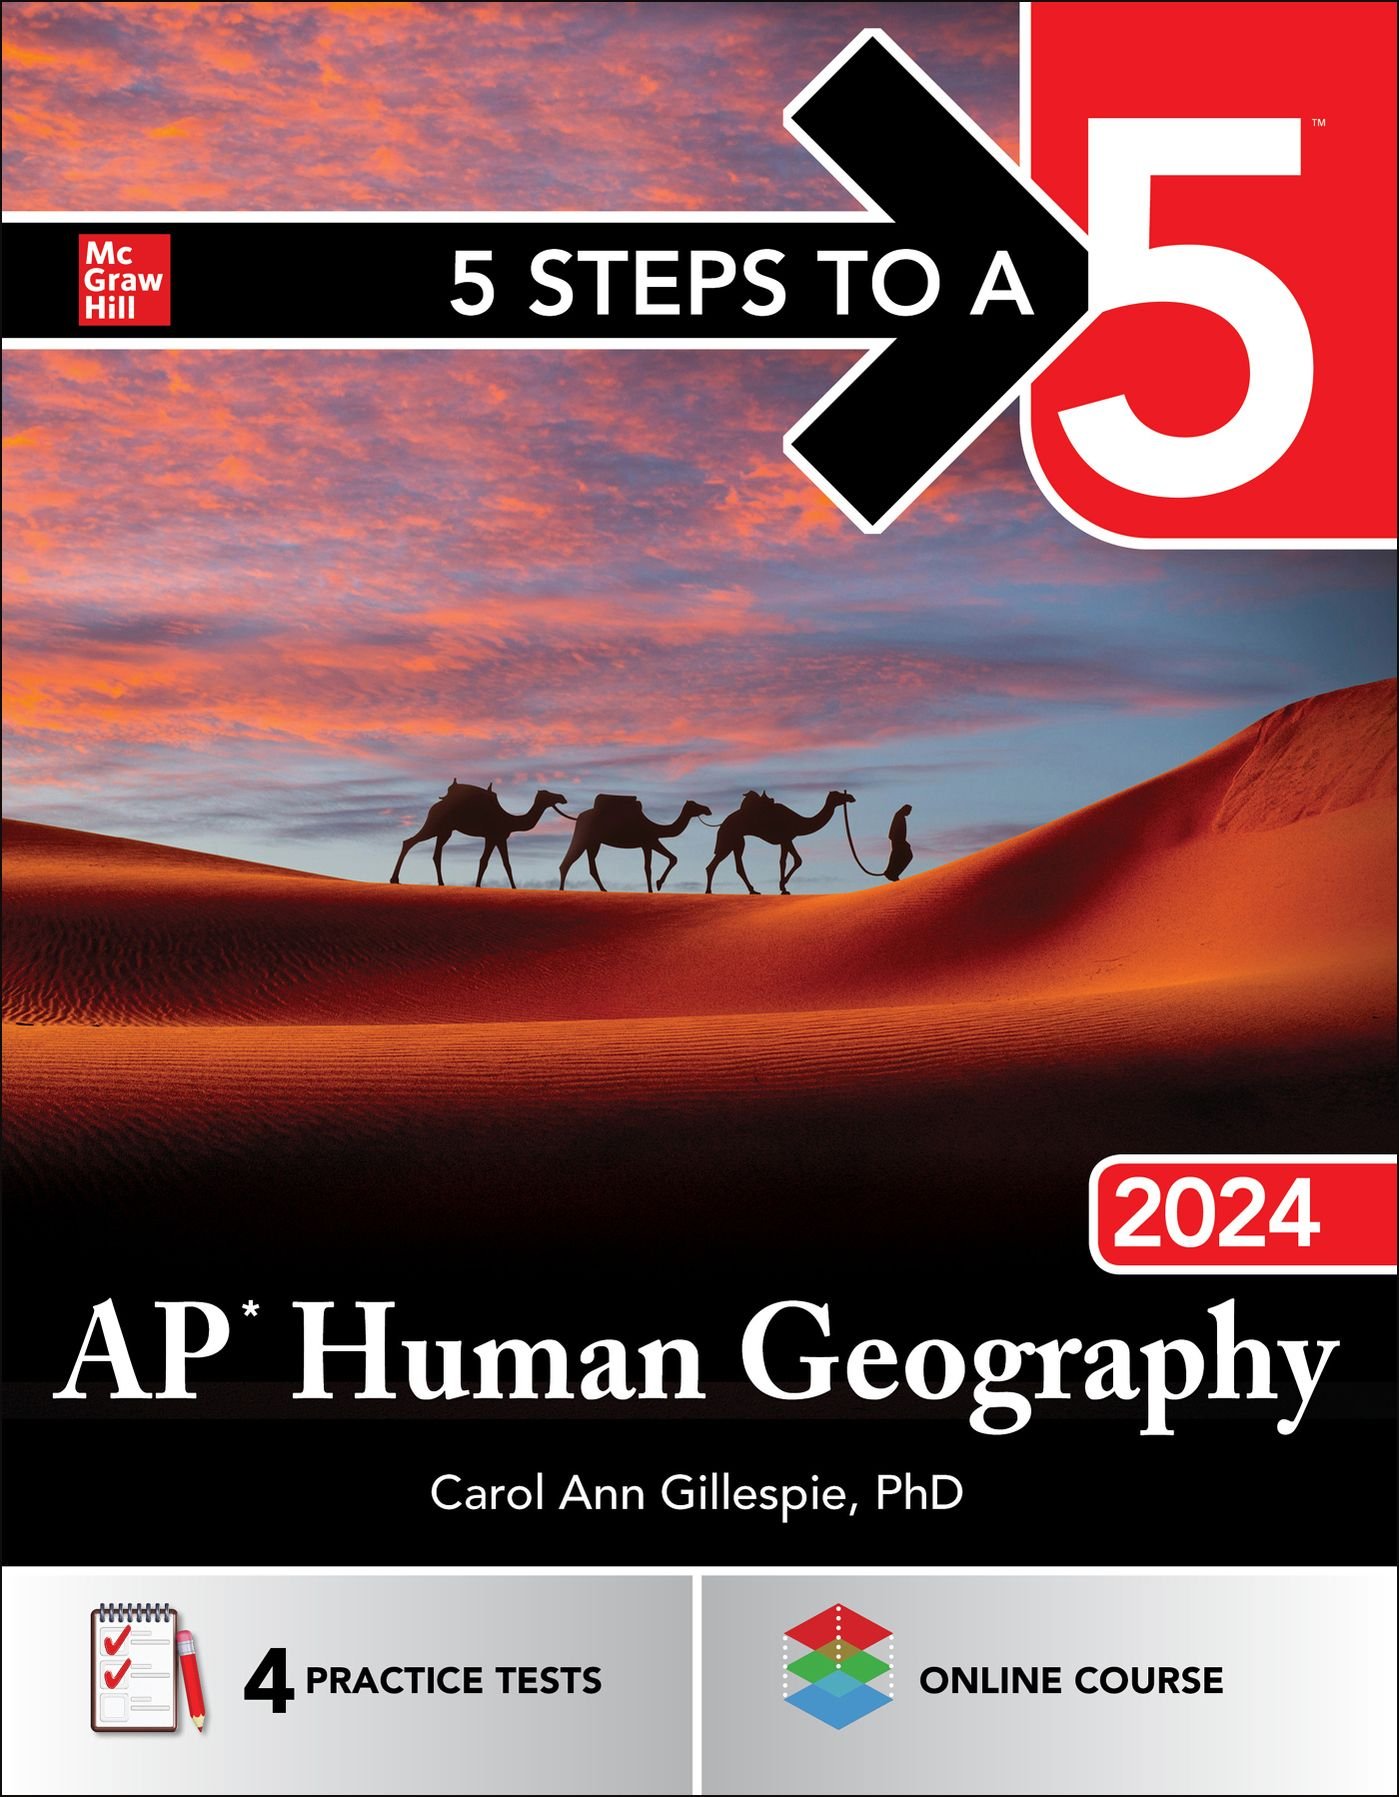 5 Steps to a 5 AP Human Geography 2024 SoftArchive